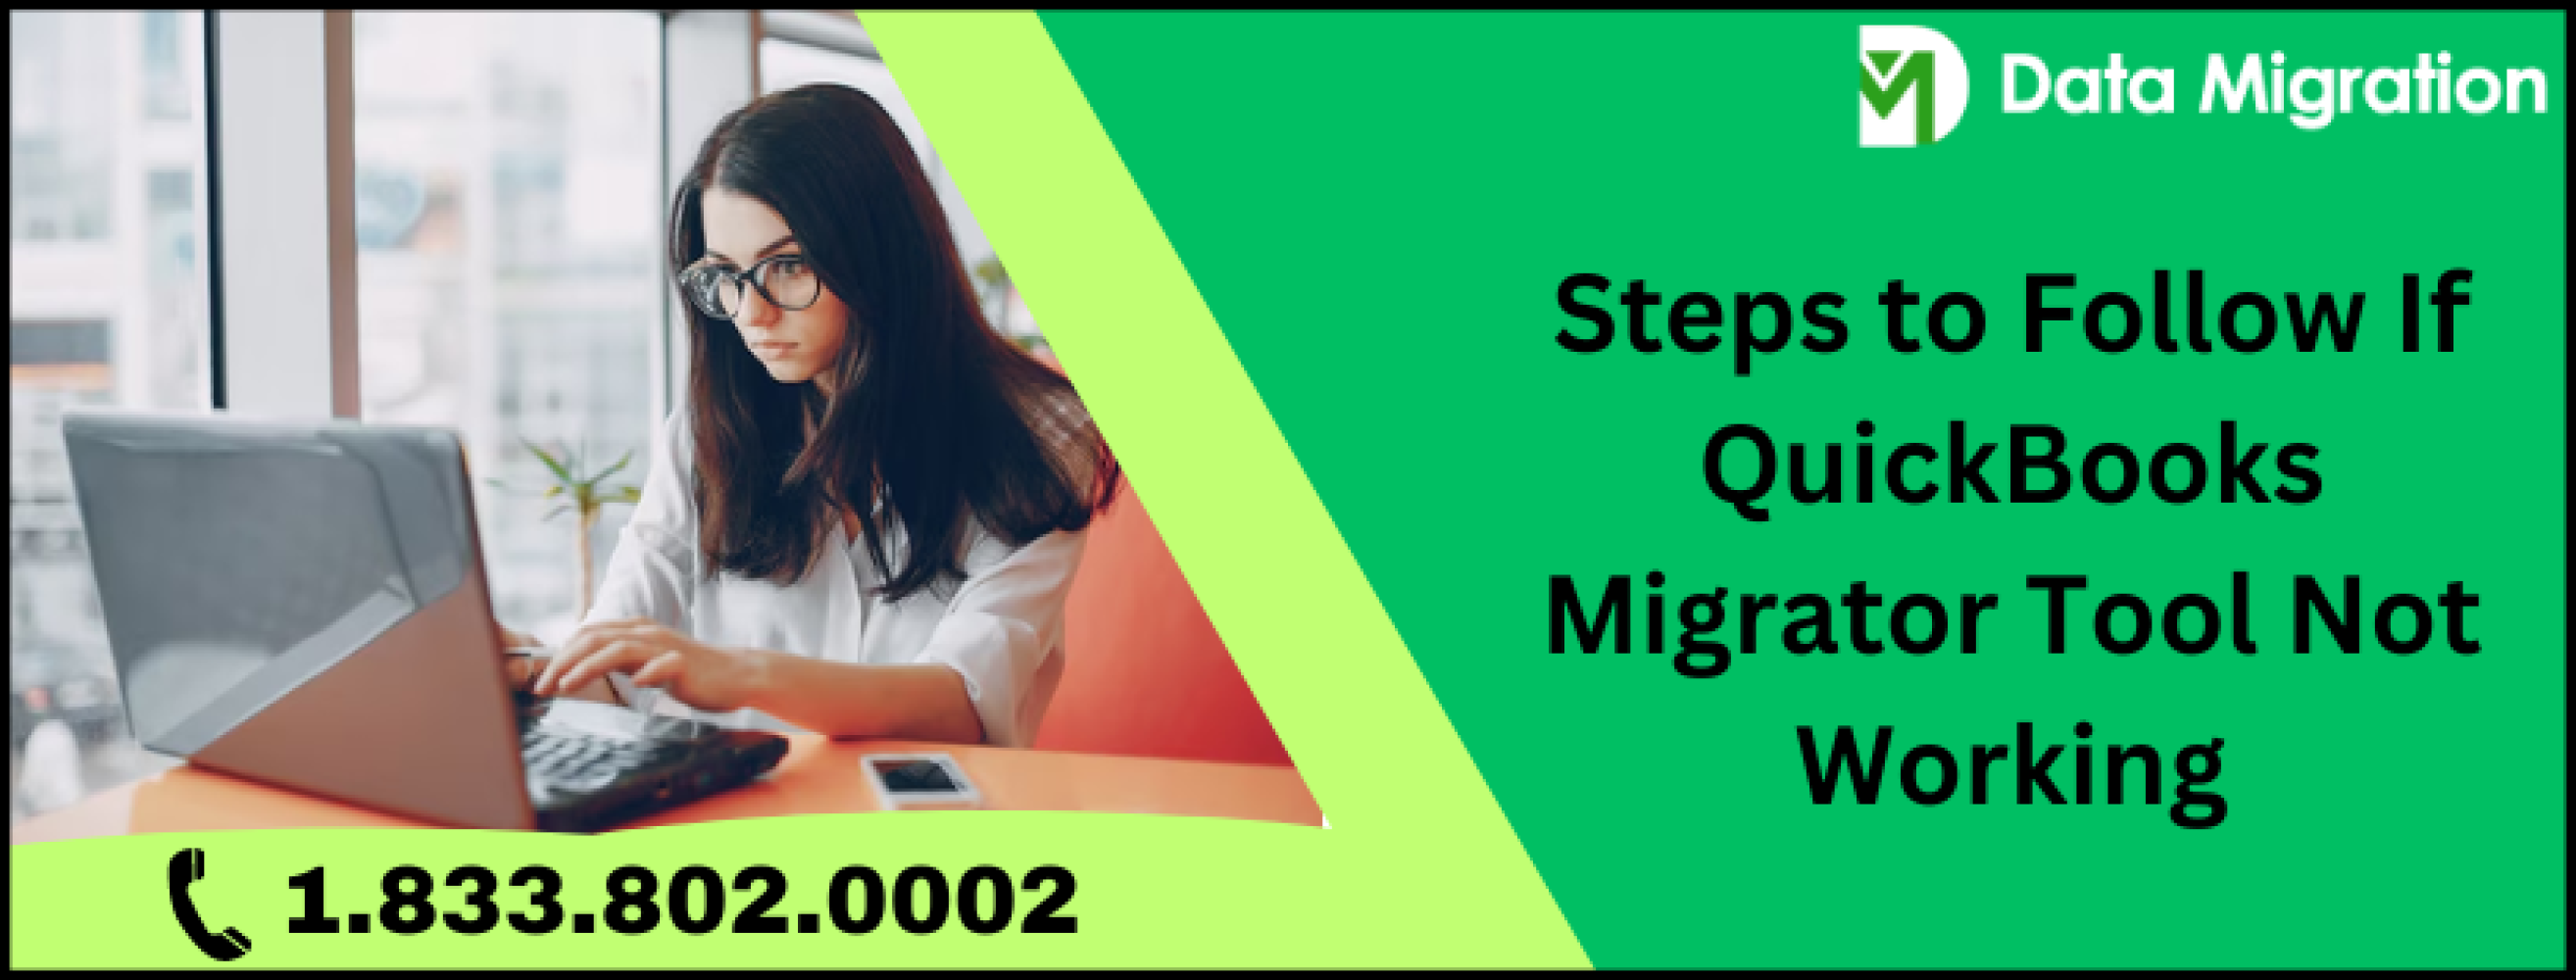 Having QuickBooks Migrator Tool Not Working Check Out These Solutions